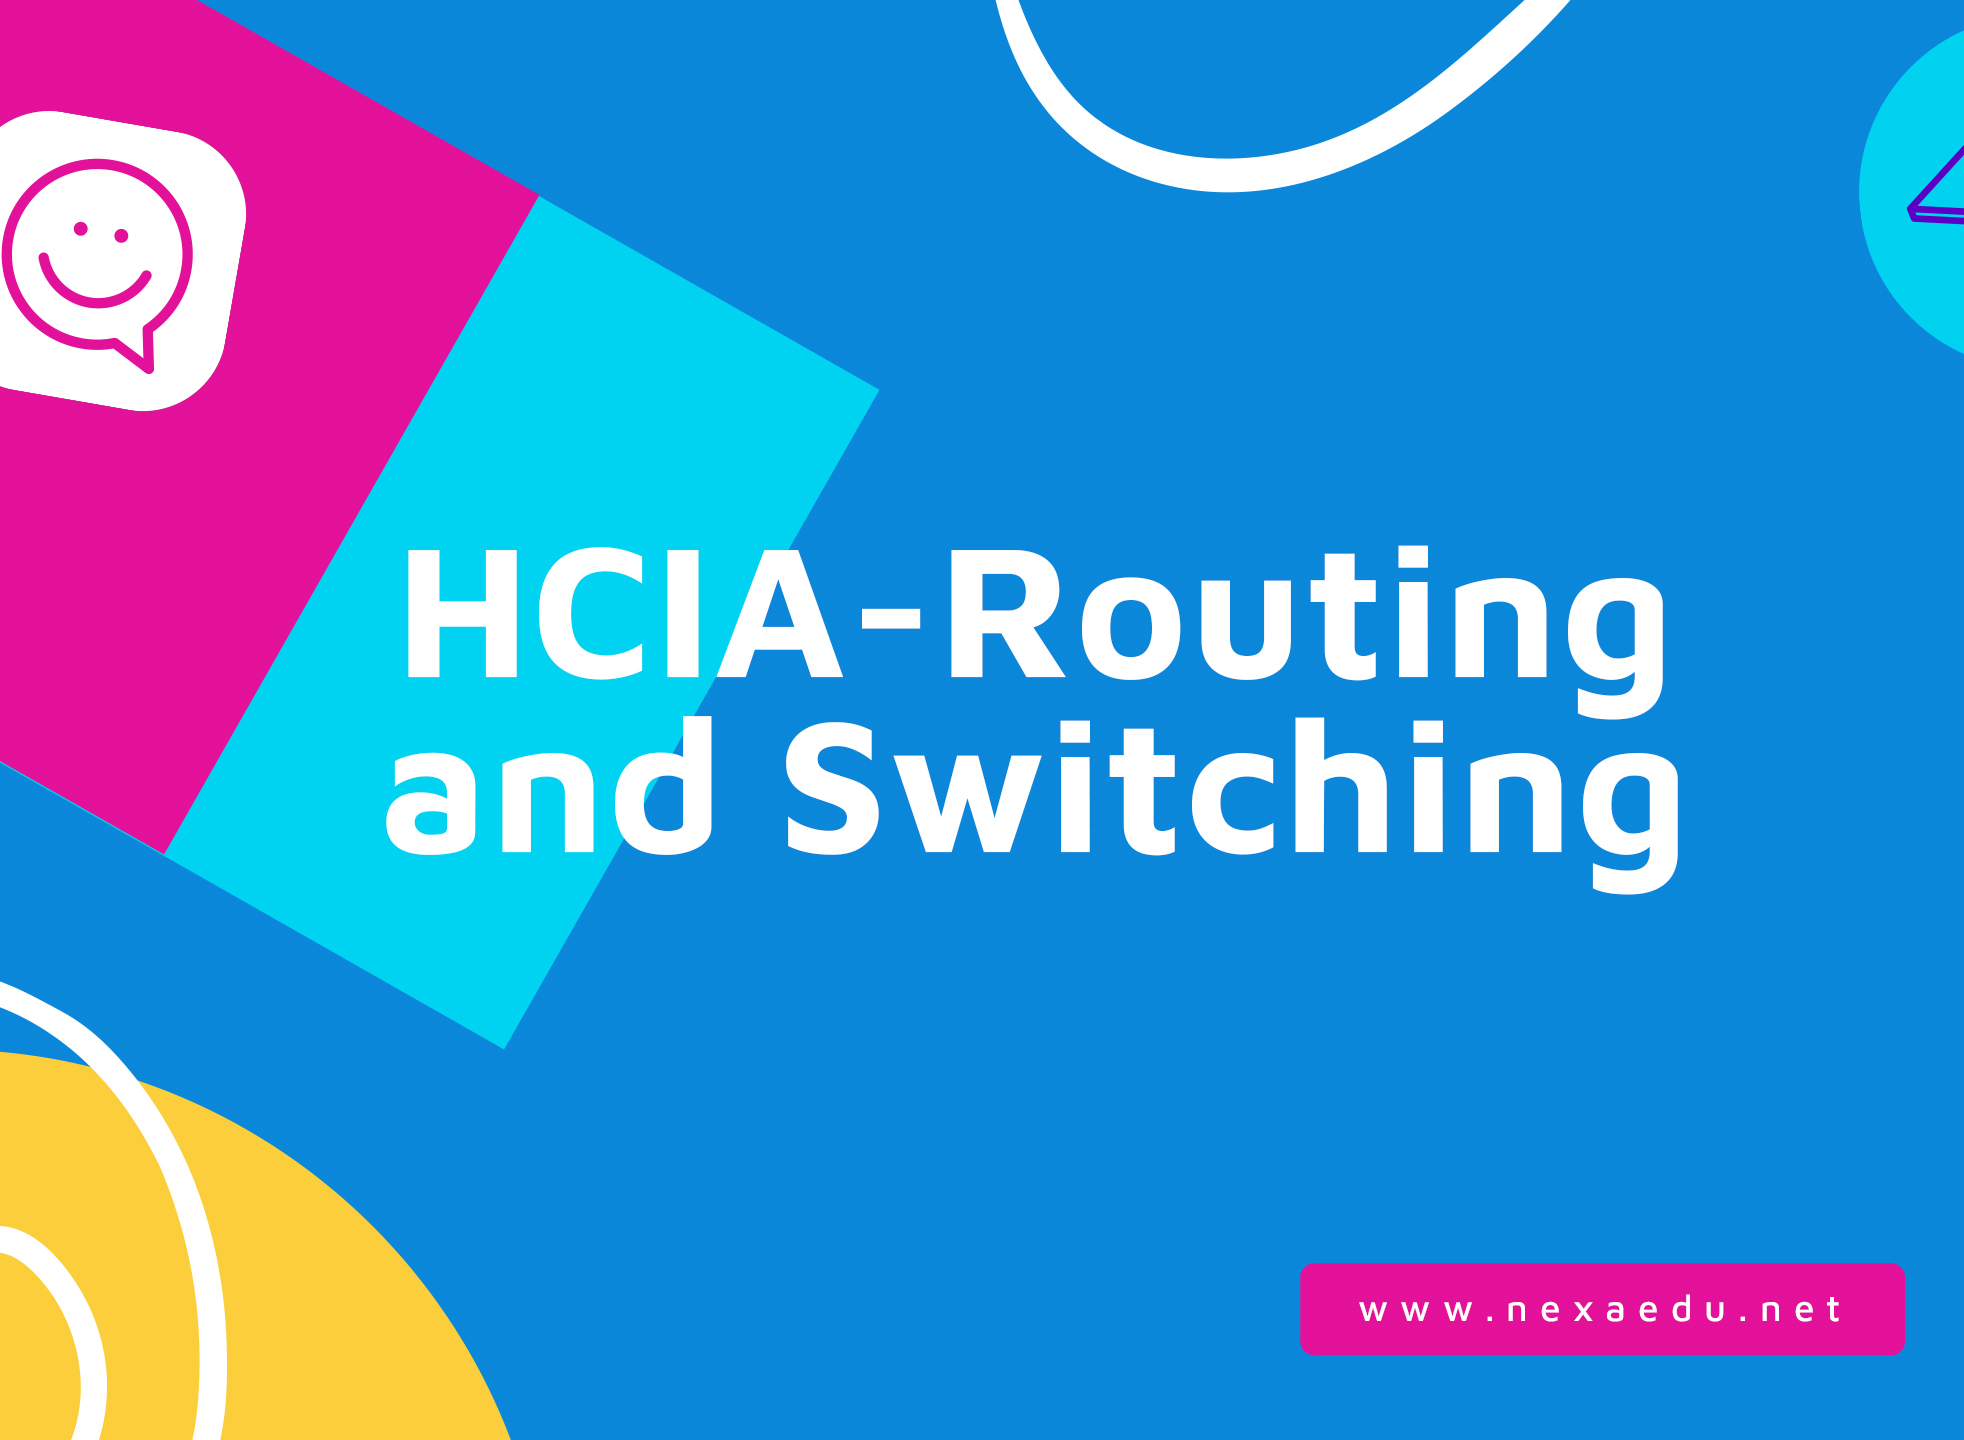 HCIA-Routing and Switching